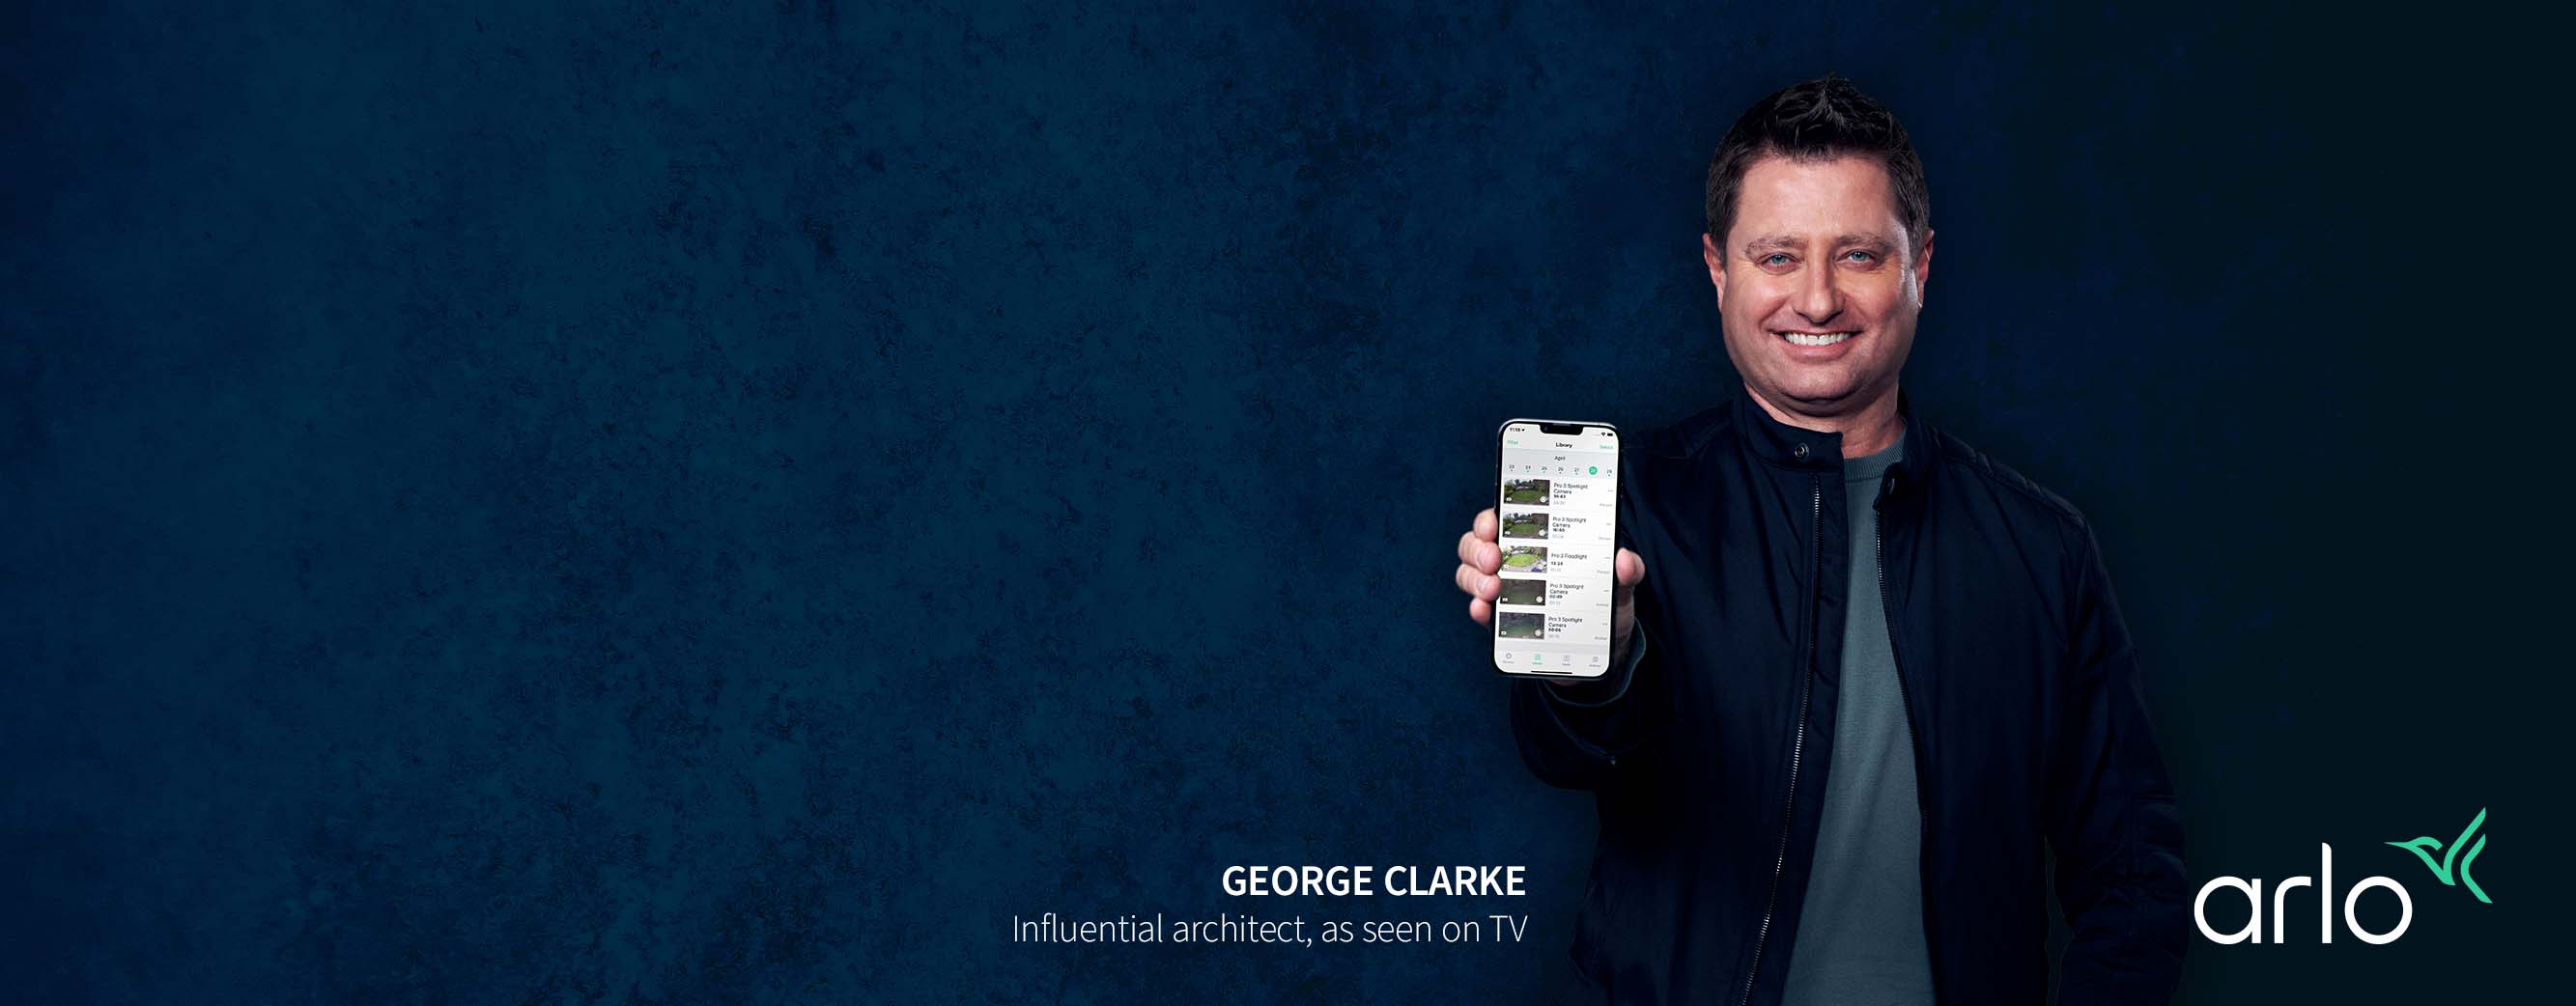 George Clarke, Influential architect on TV, recommends Arlo products for Home Security